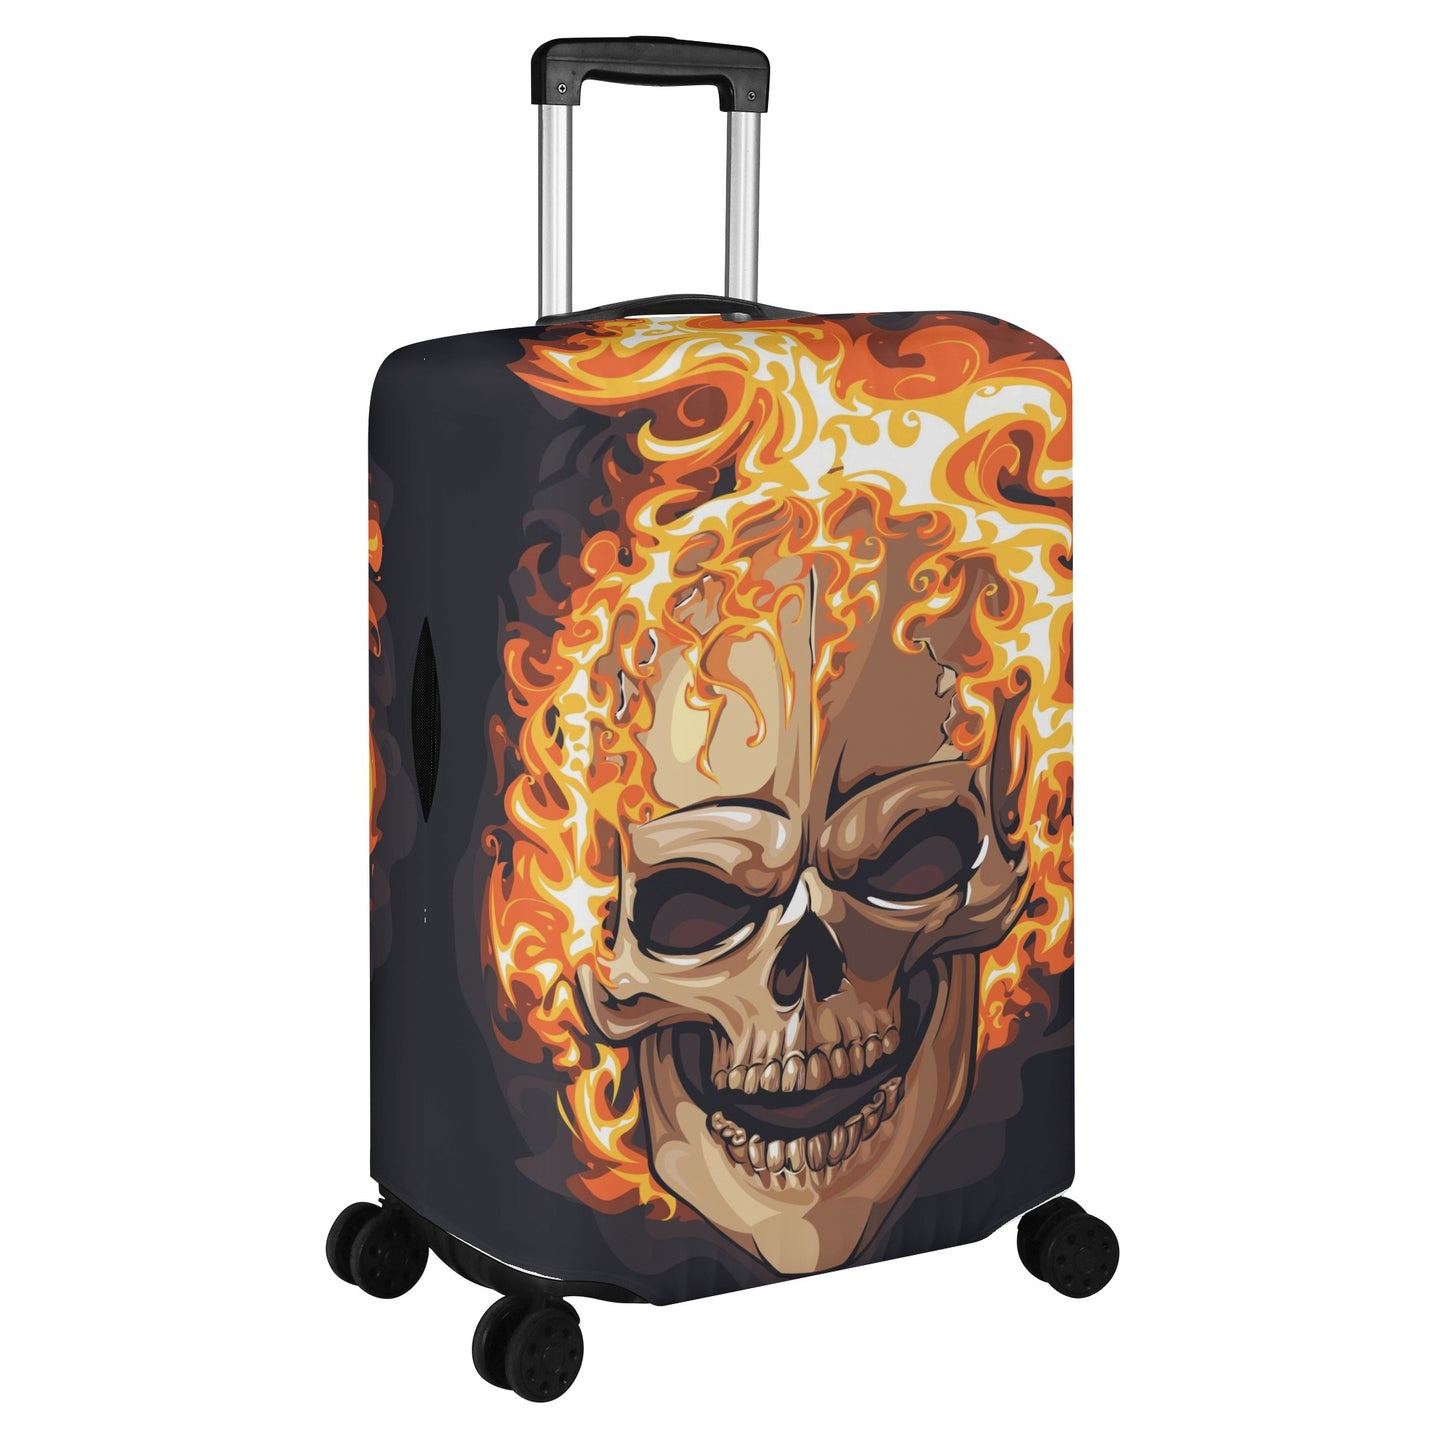 Flaming skull suitcase cover Polyester Luggage Cover